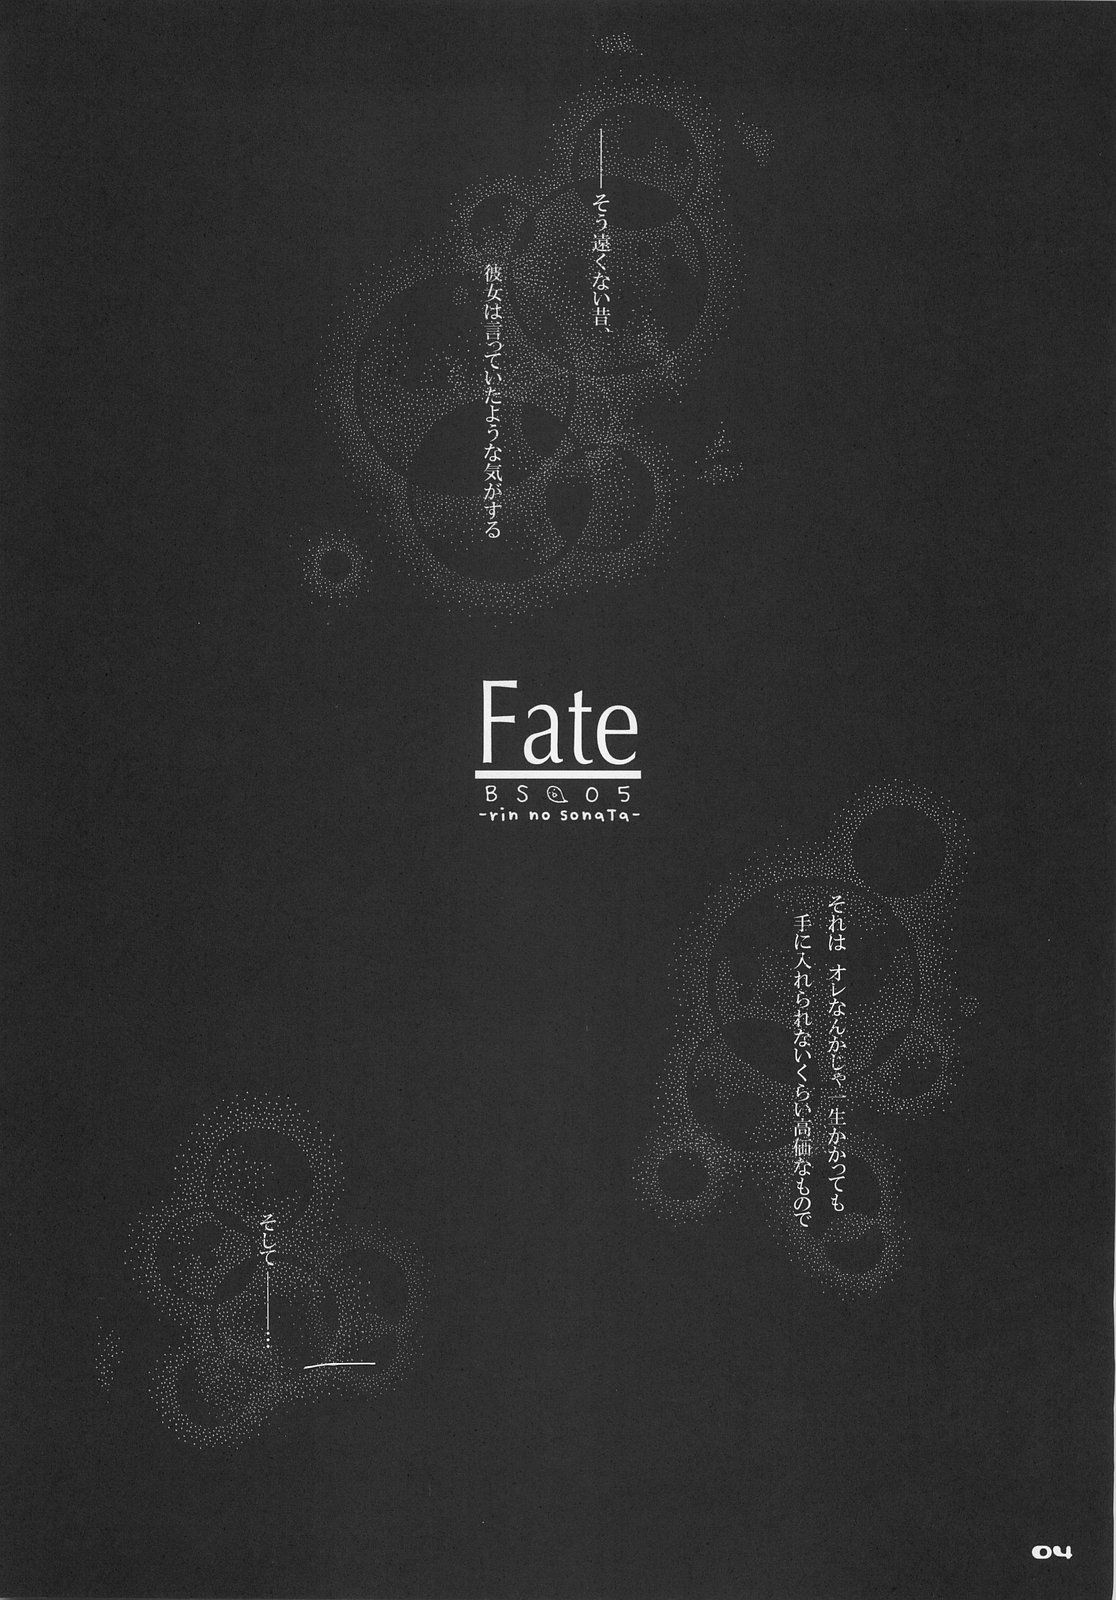 (C66) [Black Shadow (Sacchie)] Fate BS#05 Rin no Sonata (Fate/stay night) (C66) [ぶらっくしゃど～ (さっち)] Fate BS#05 りんのソナタ (Fate/stay night)